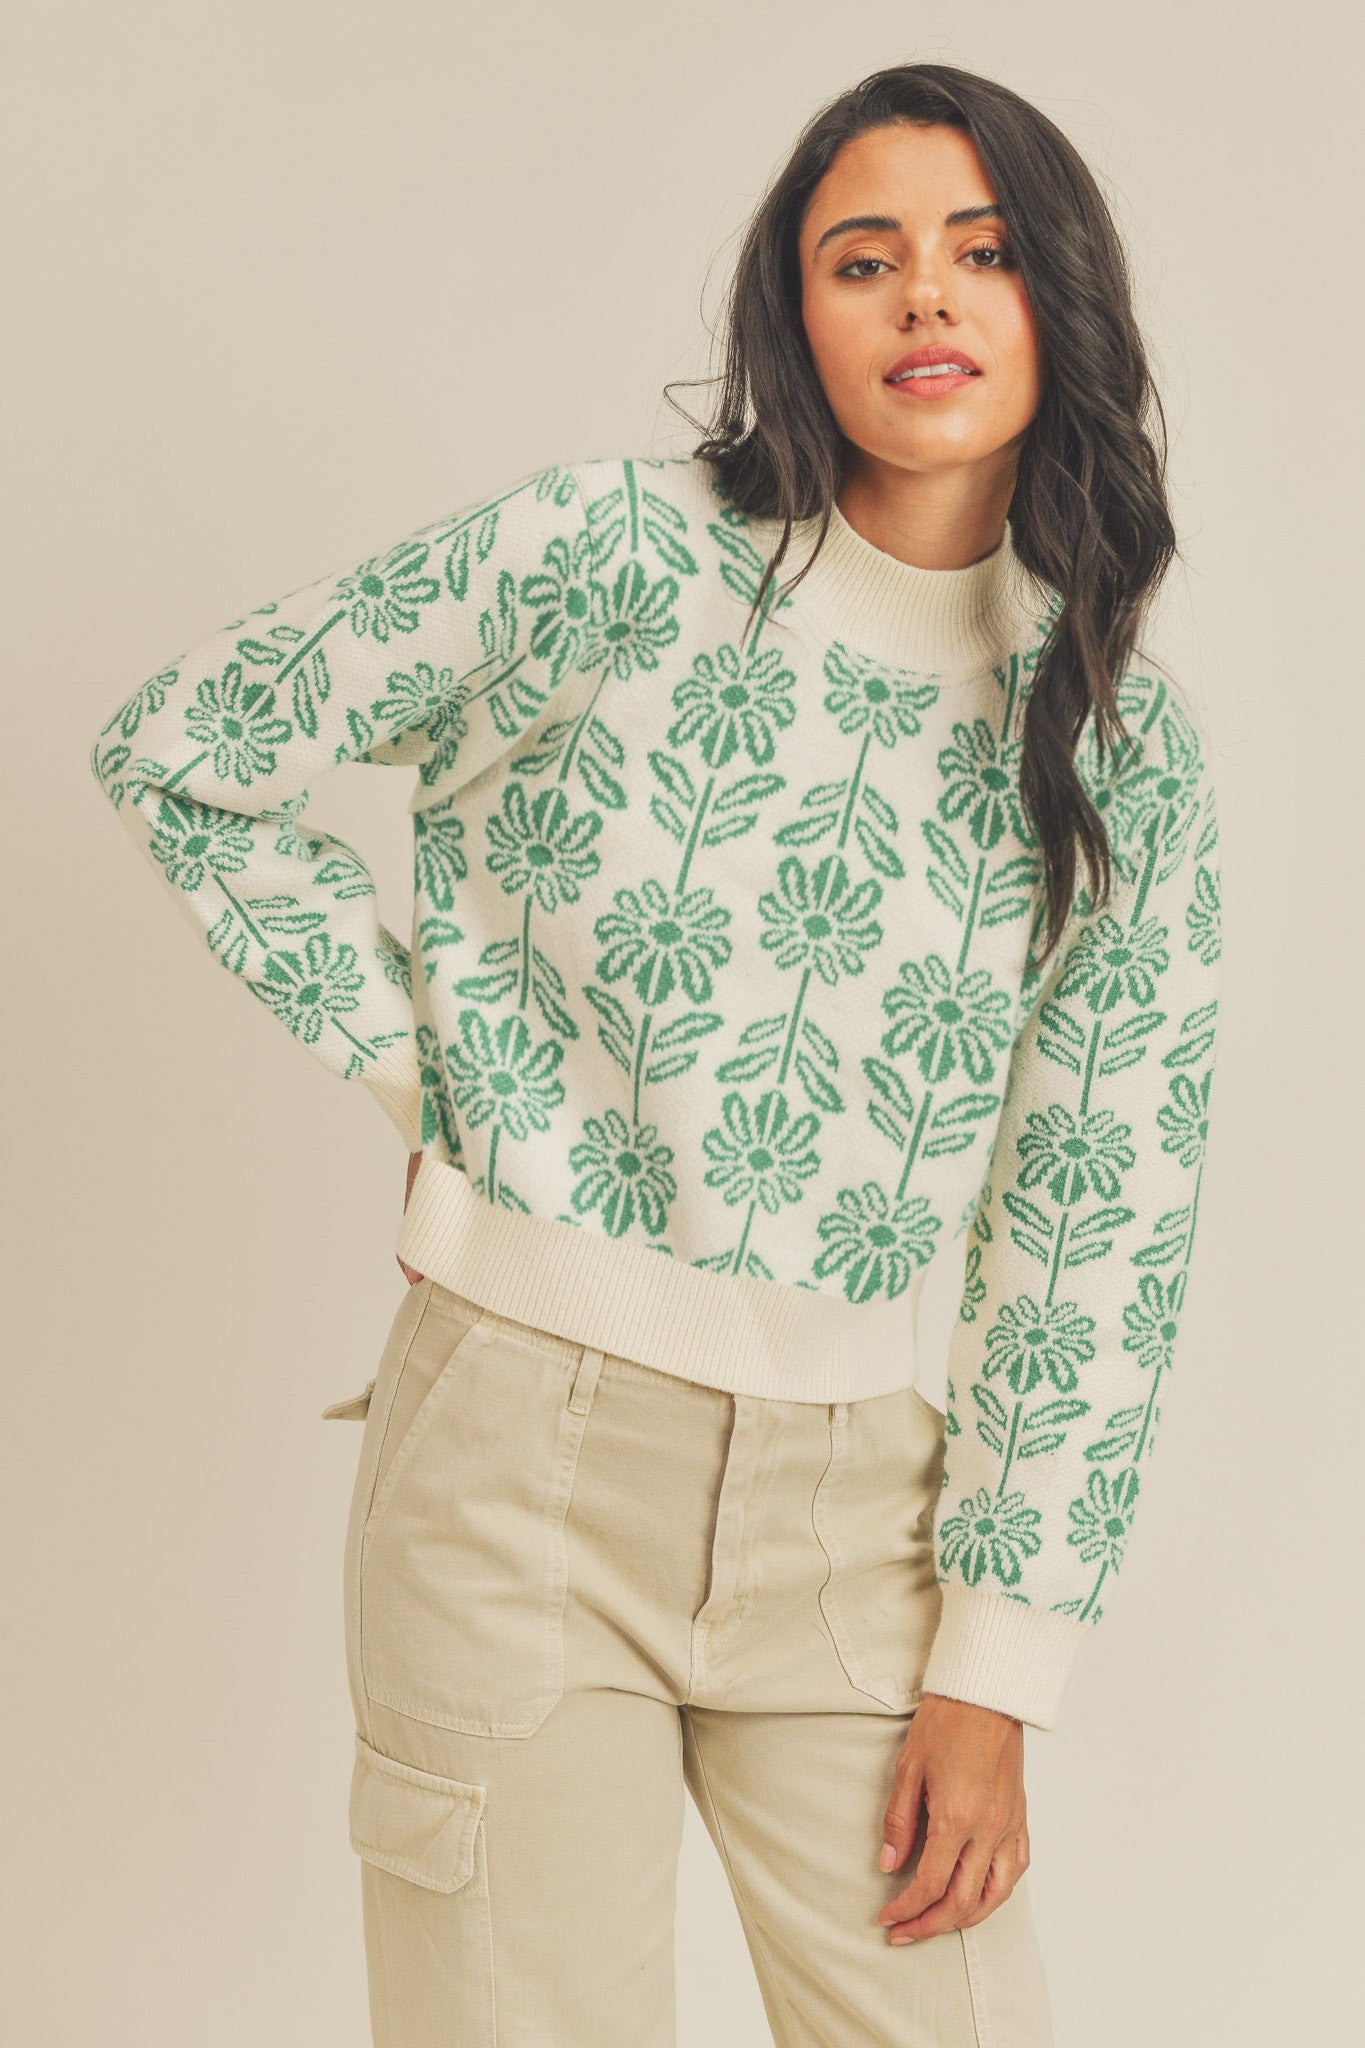 Add a touch of floral charm to your wardrobe with our Bright Green Floral Knit Sweater. This pullover sweater features a beautiful floral pattern, ribbed high round neckline, hem, and cuffs. Made from a blend of 50% viscose, 30% acrylic, and 20% polyester, it ensures both comfort and style. Perfect for a cozy yet chic look. 